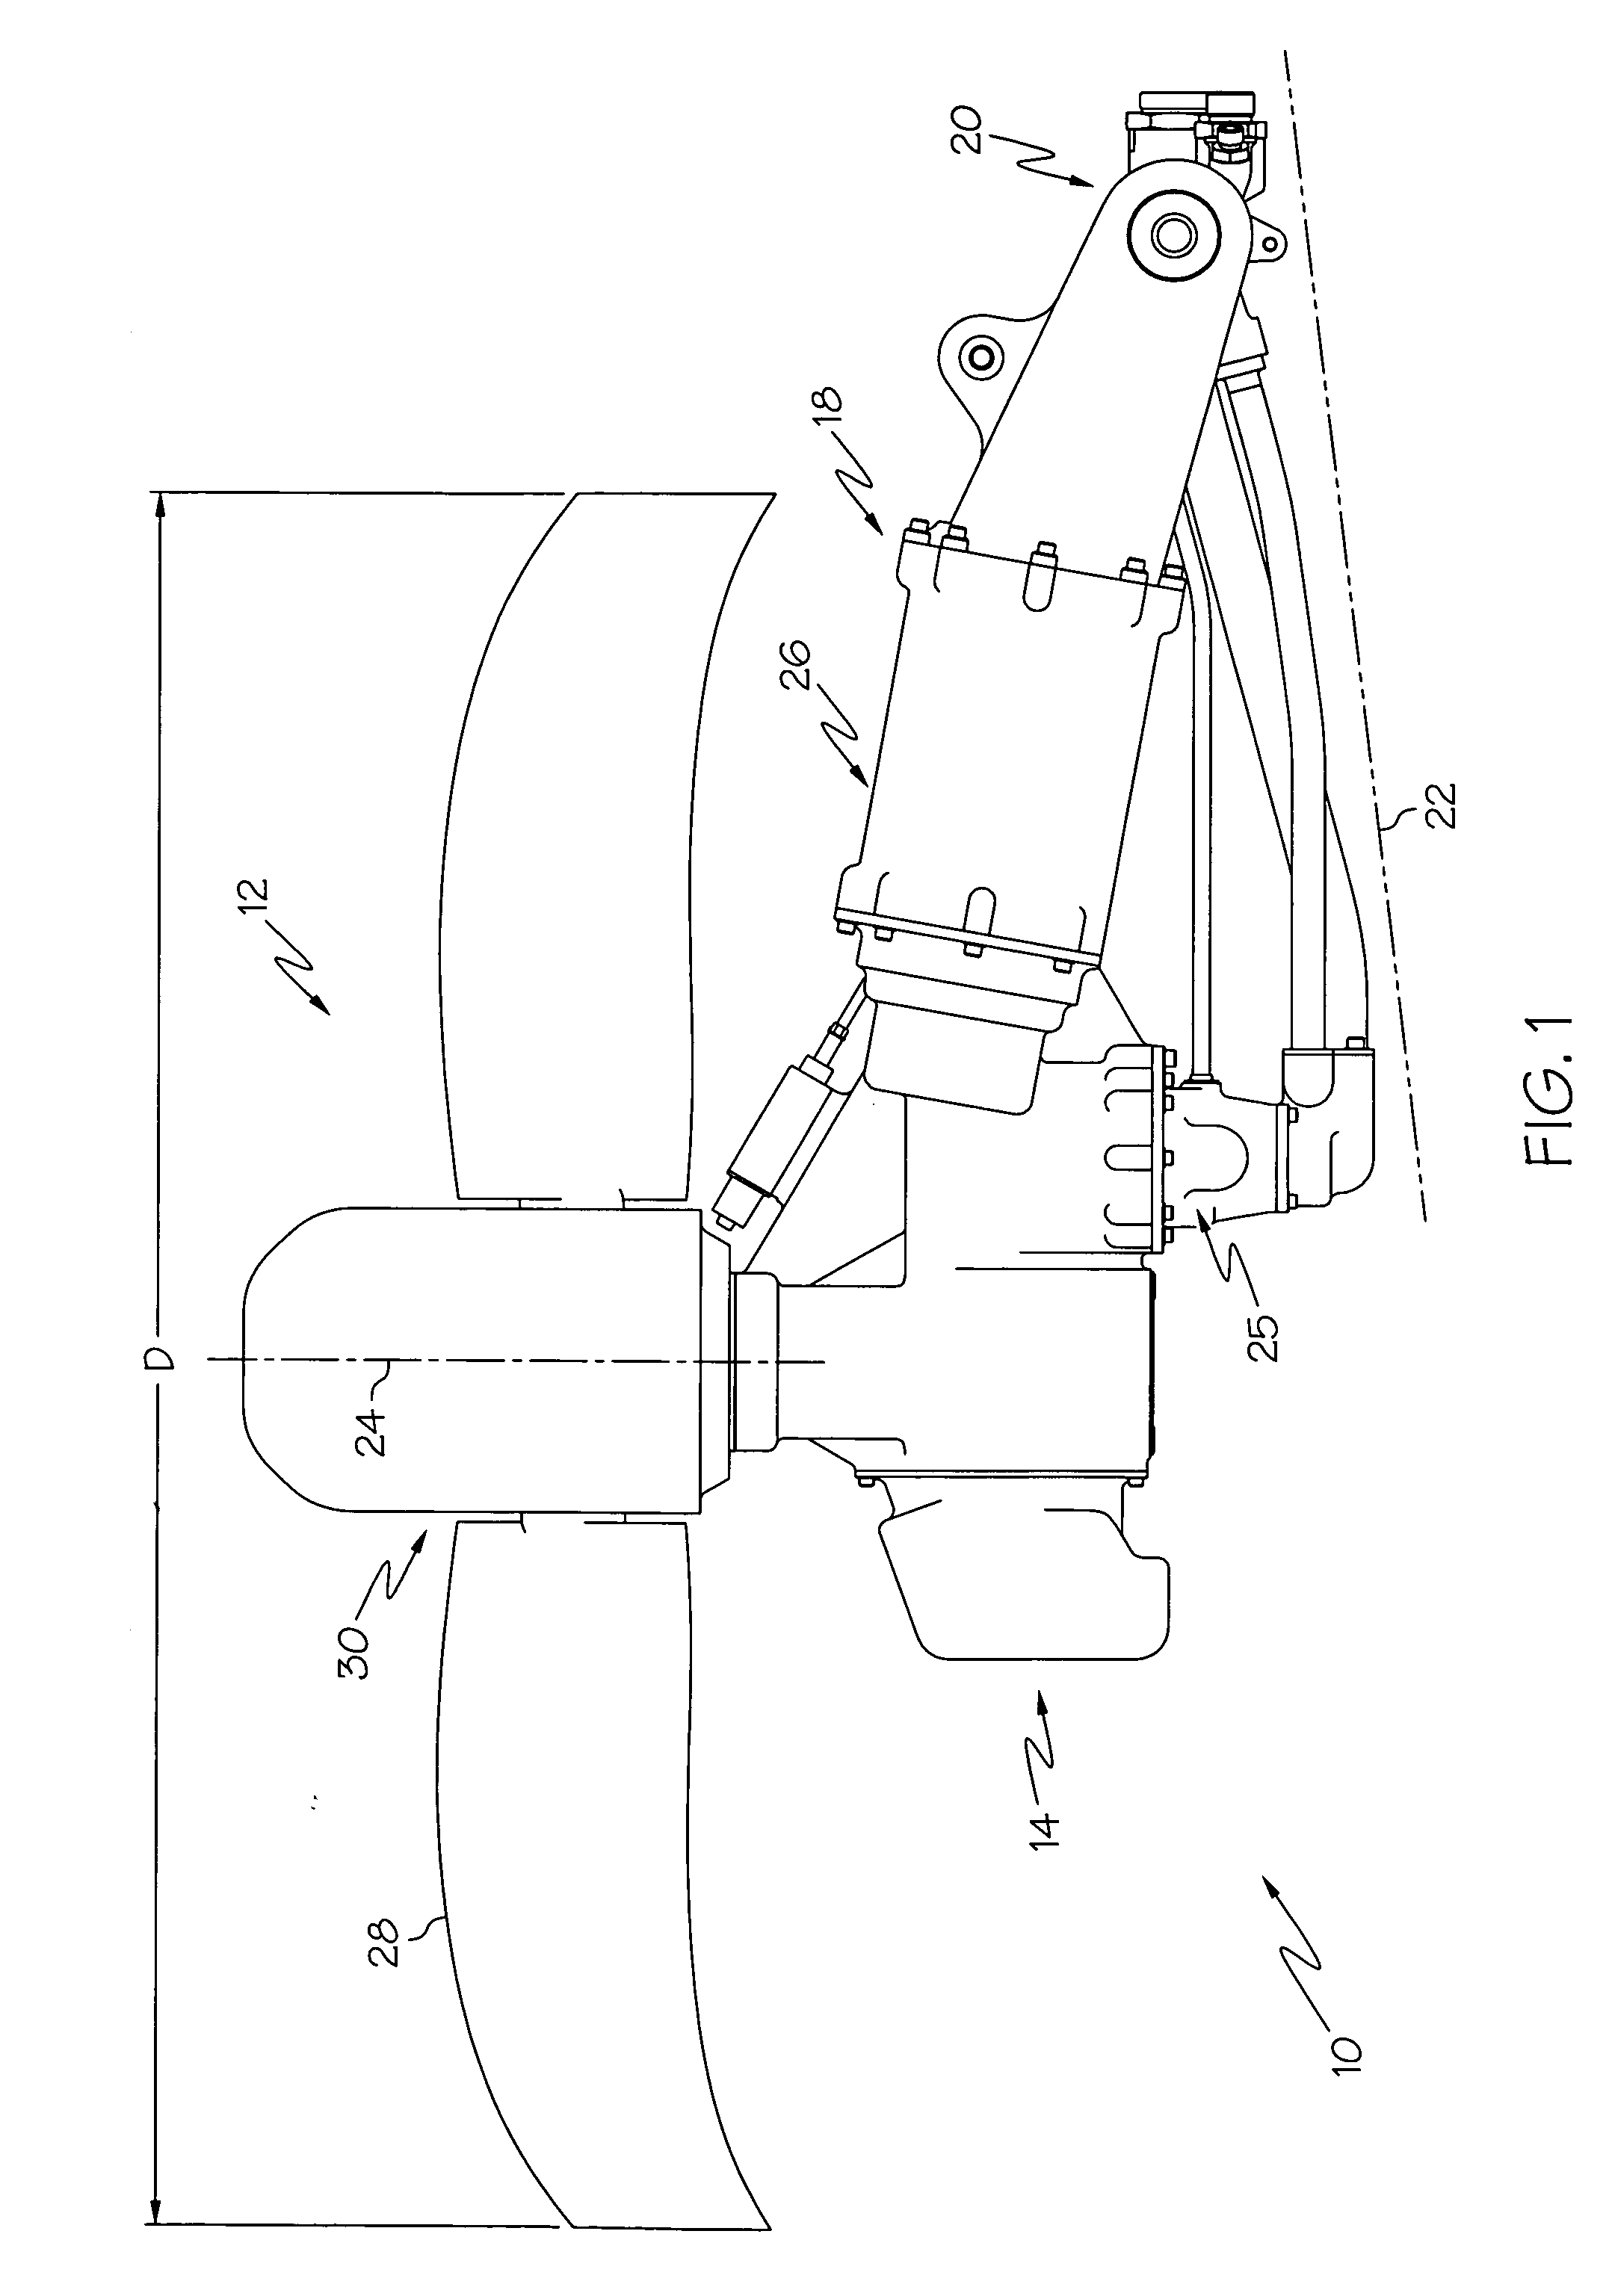 Ram air turbine with compound geartrain gearbox